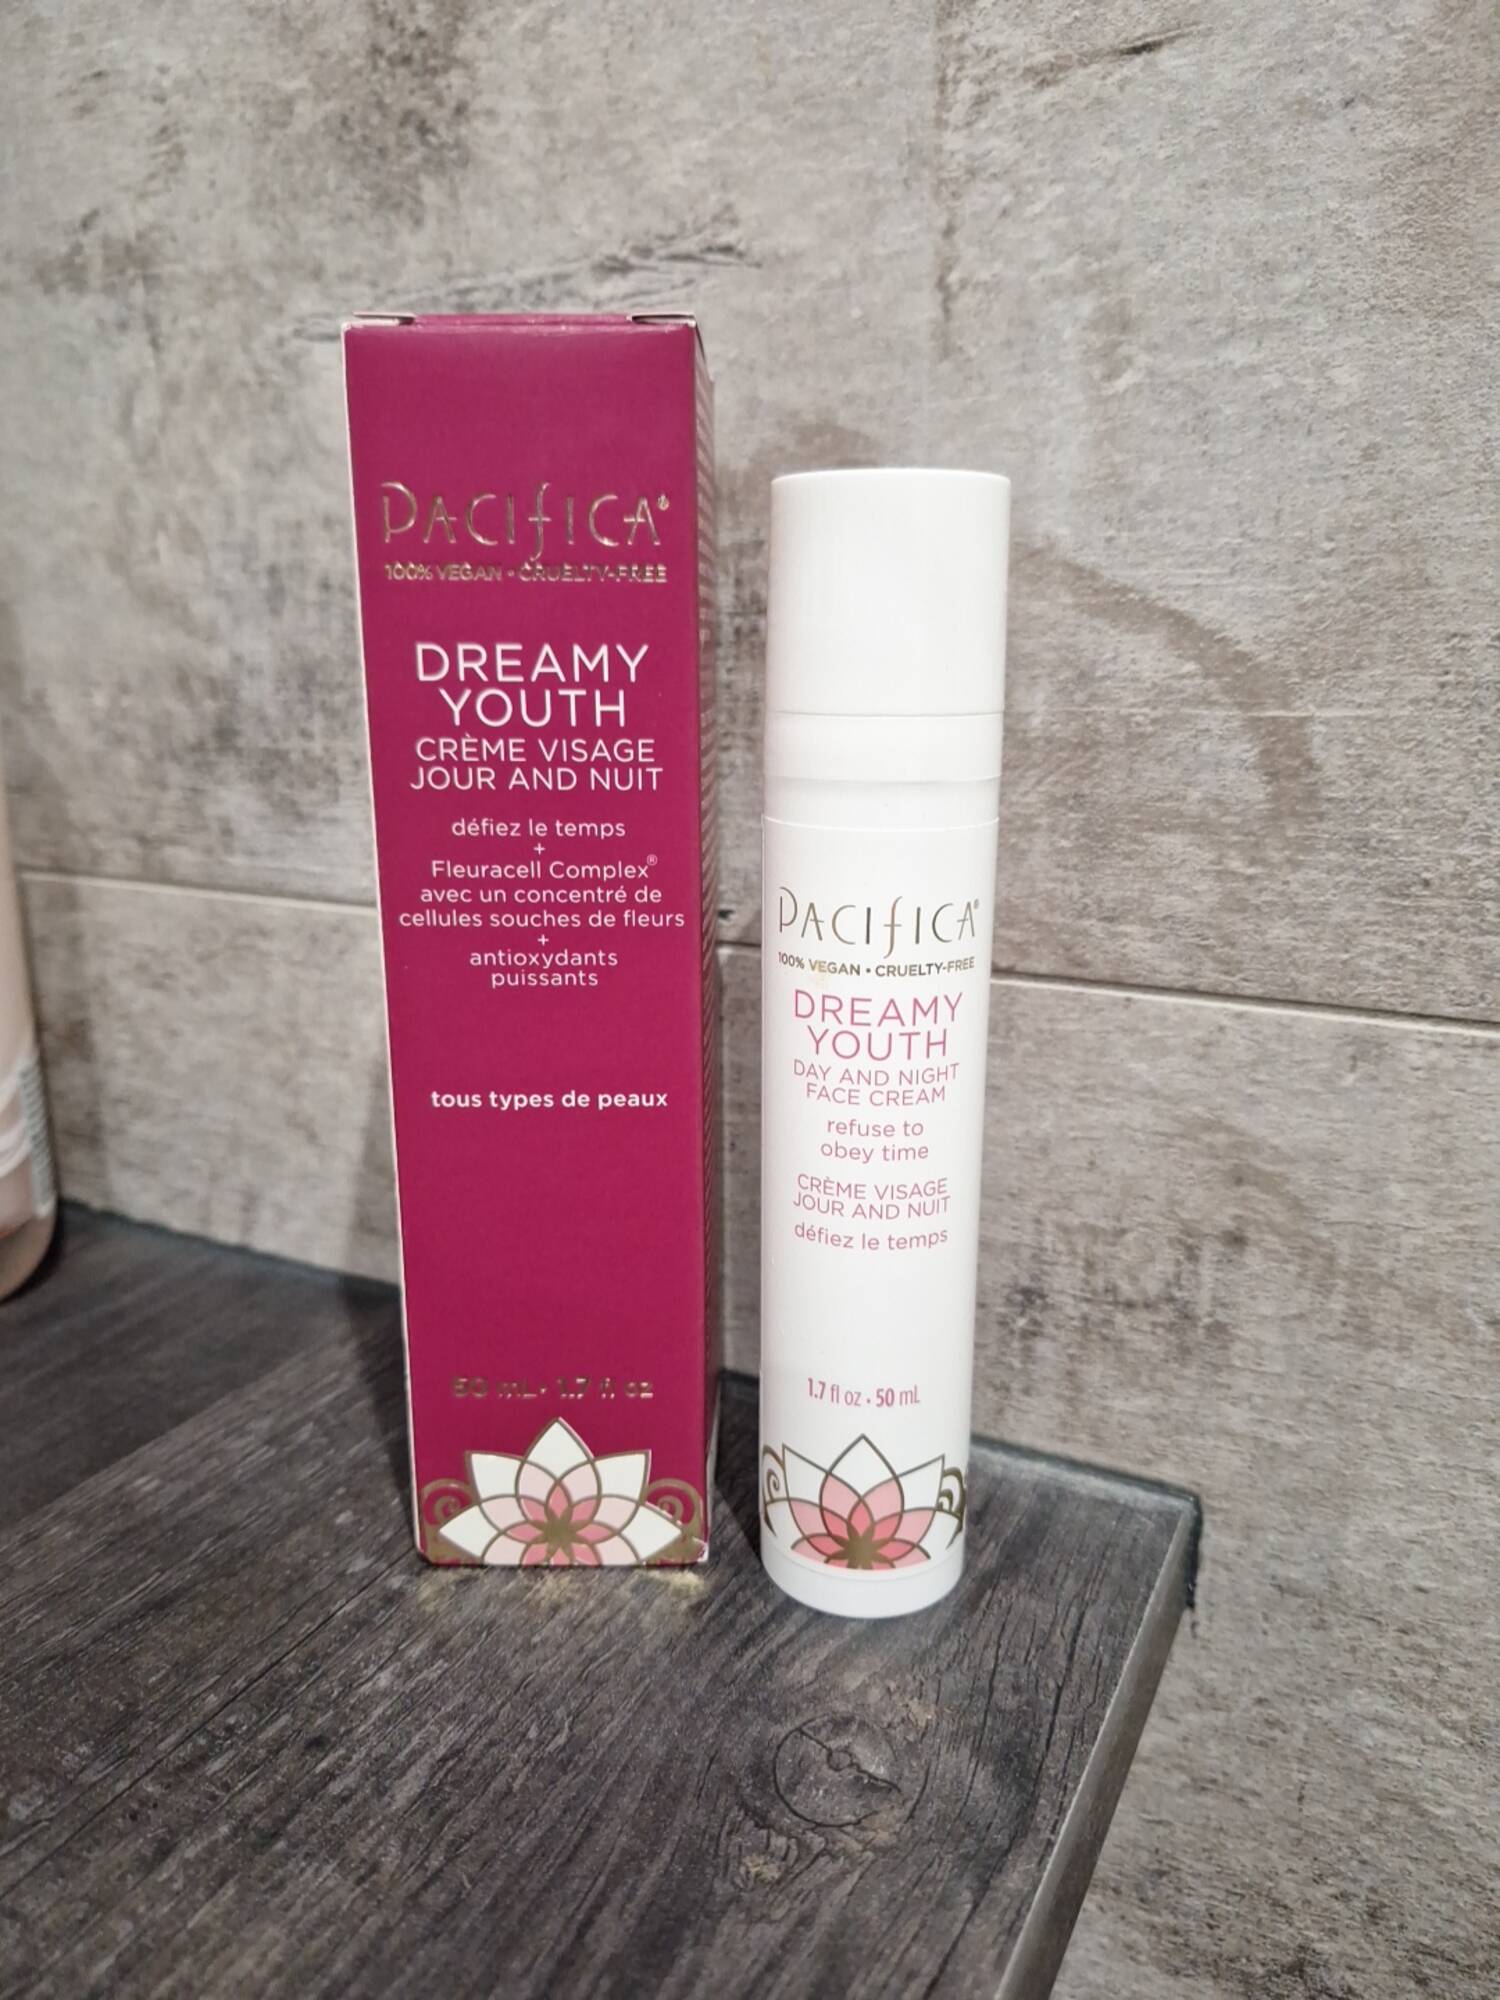 PACIFICA - Dreamy youth - Crème visage jour and nuit